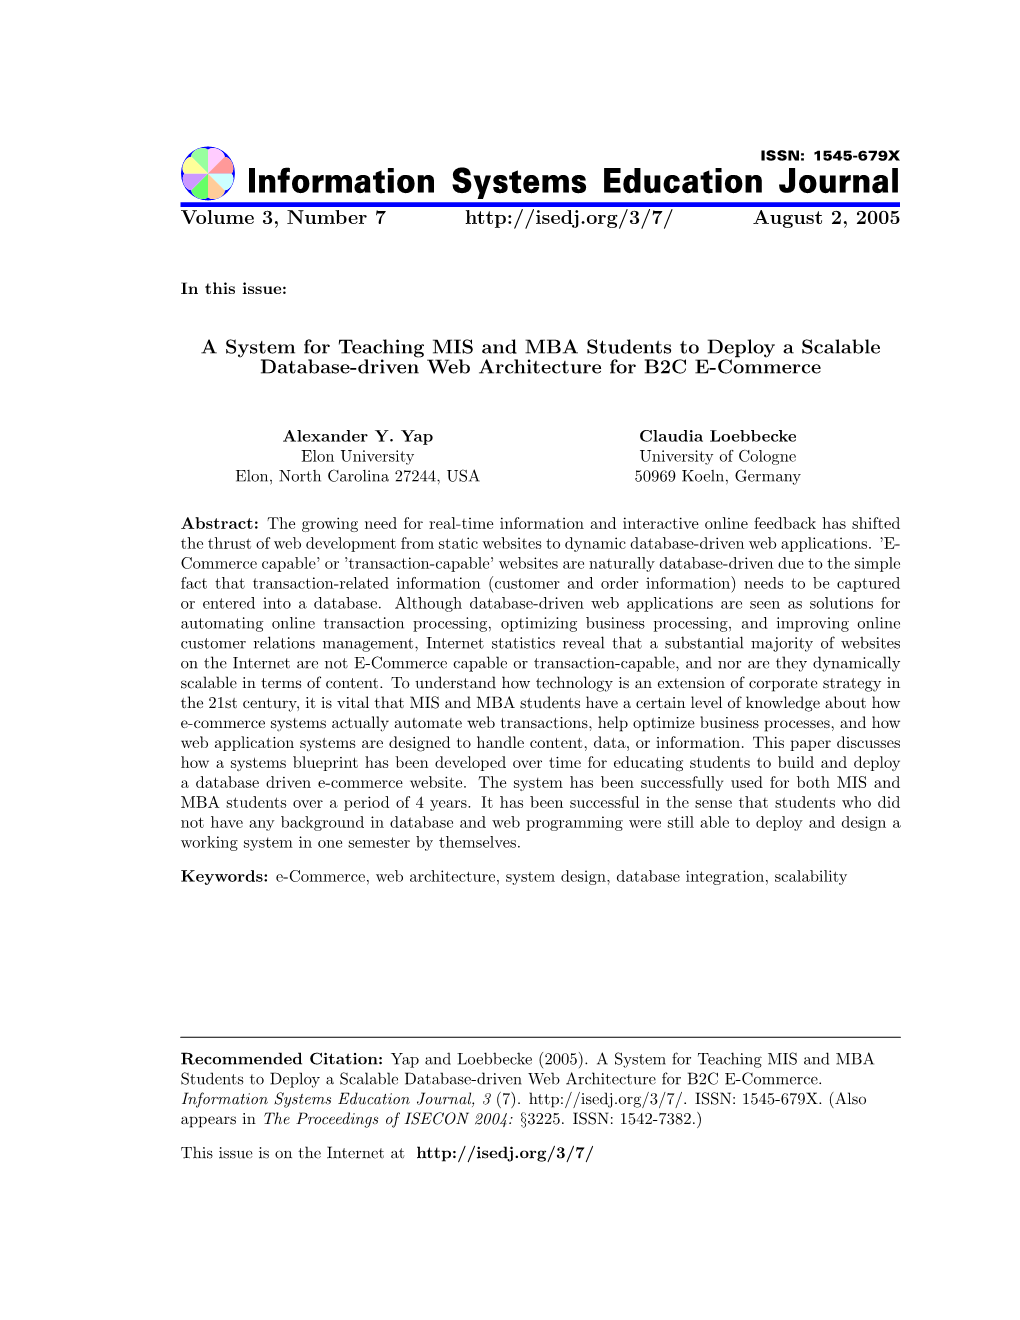 A System for Teaching MIS and MBA Students to Deploy a Scalable Database-Driven Web Architecture for B2C E-Commerce